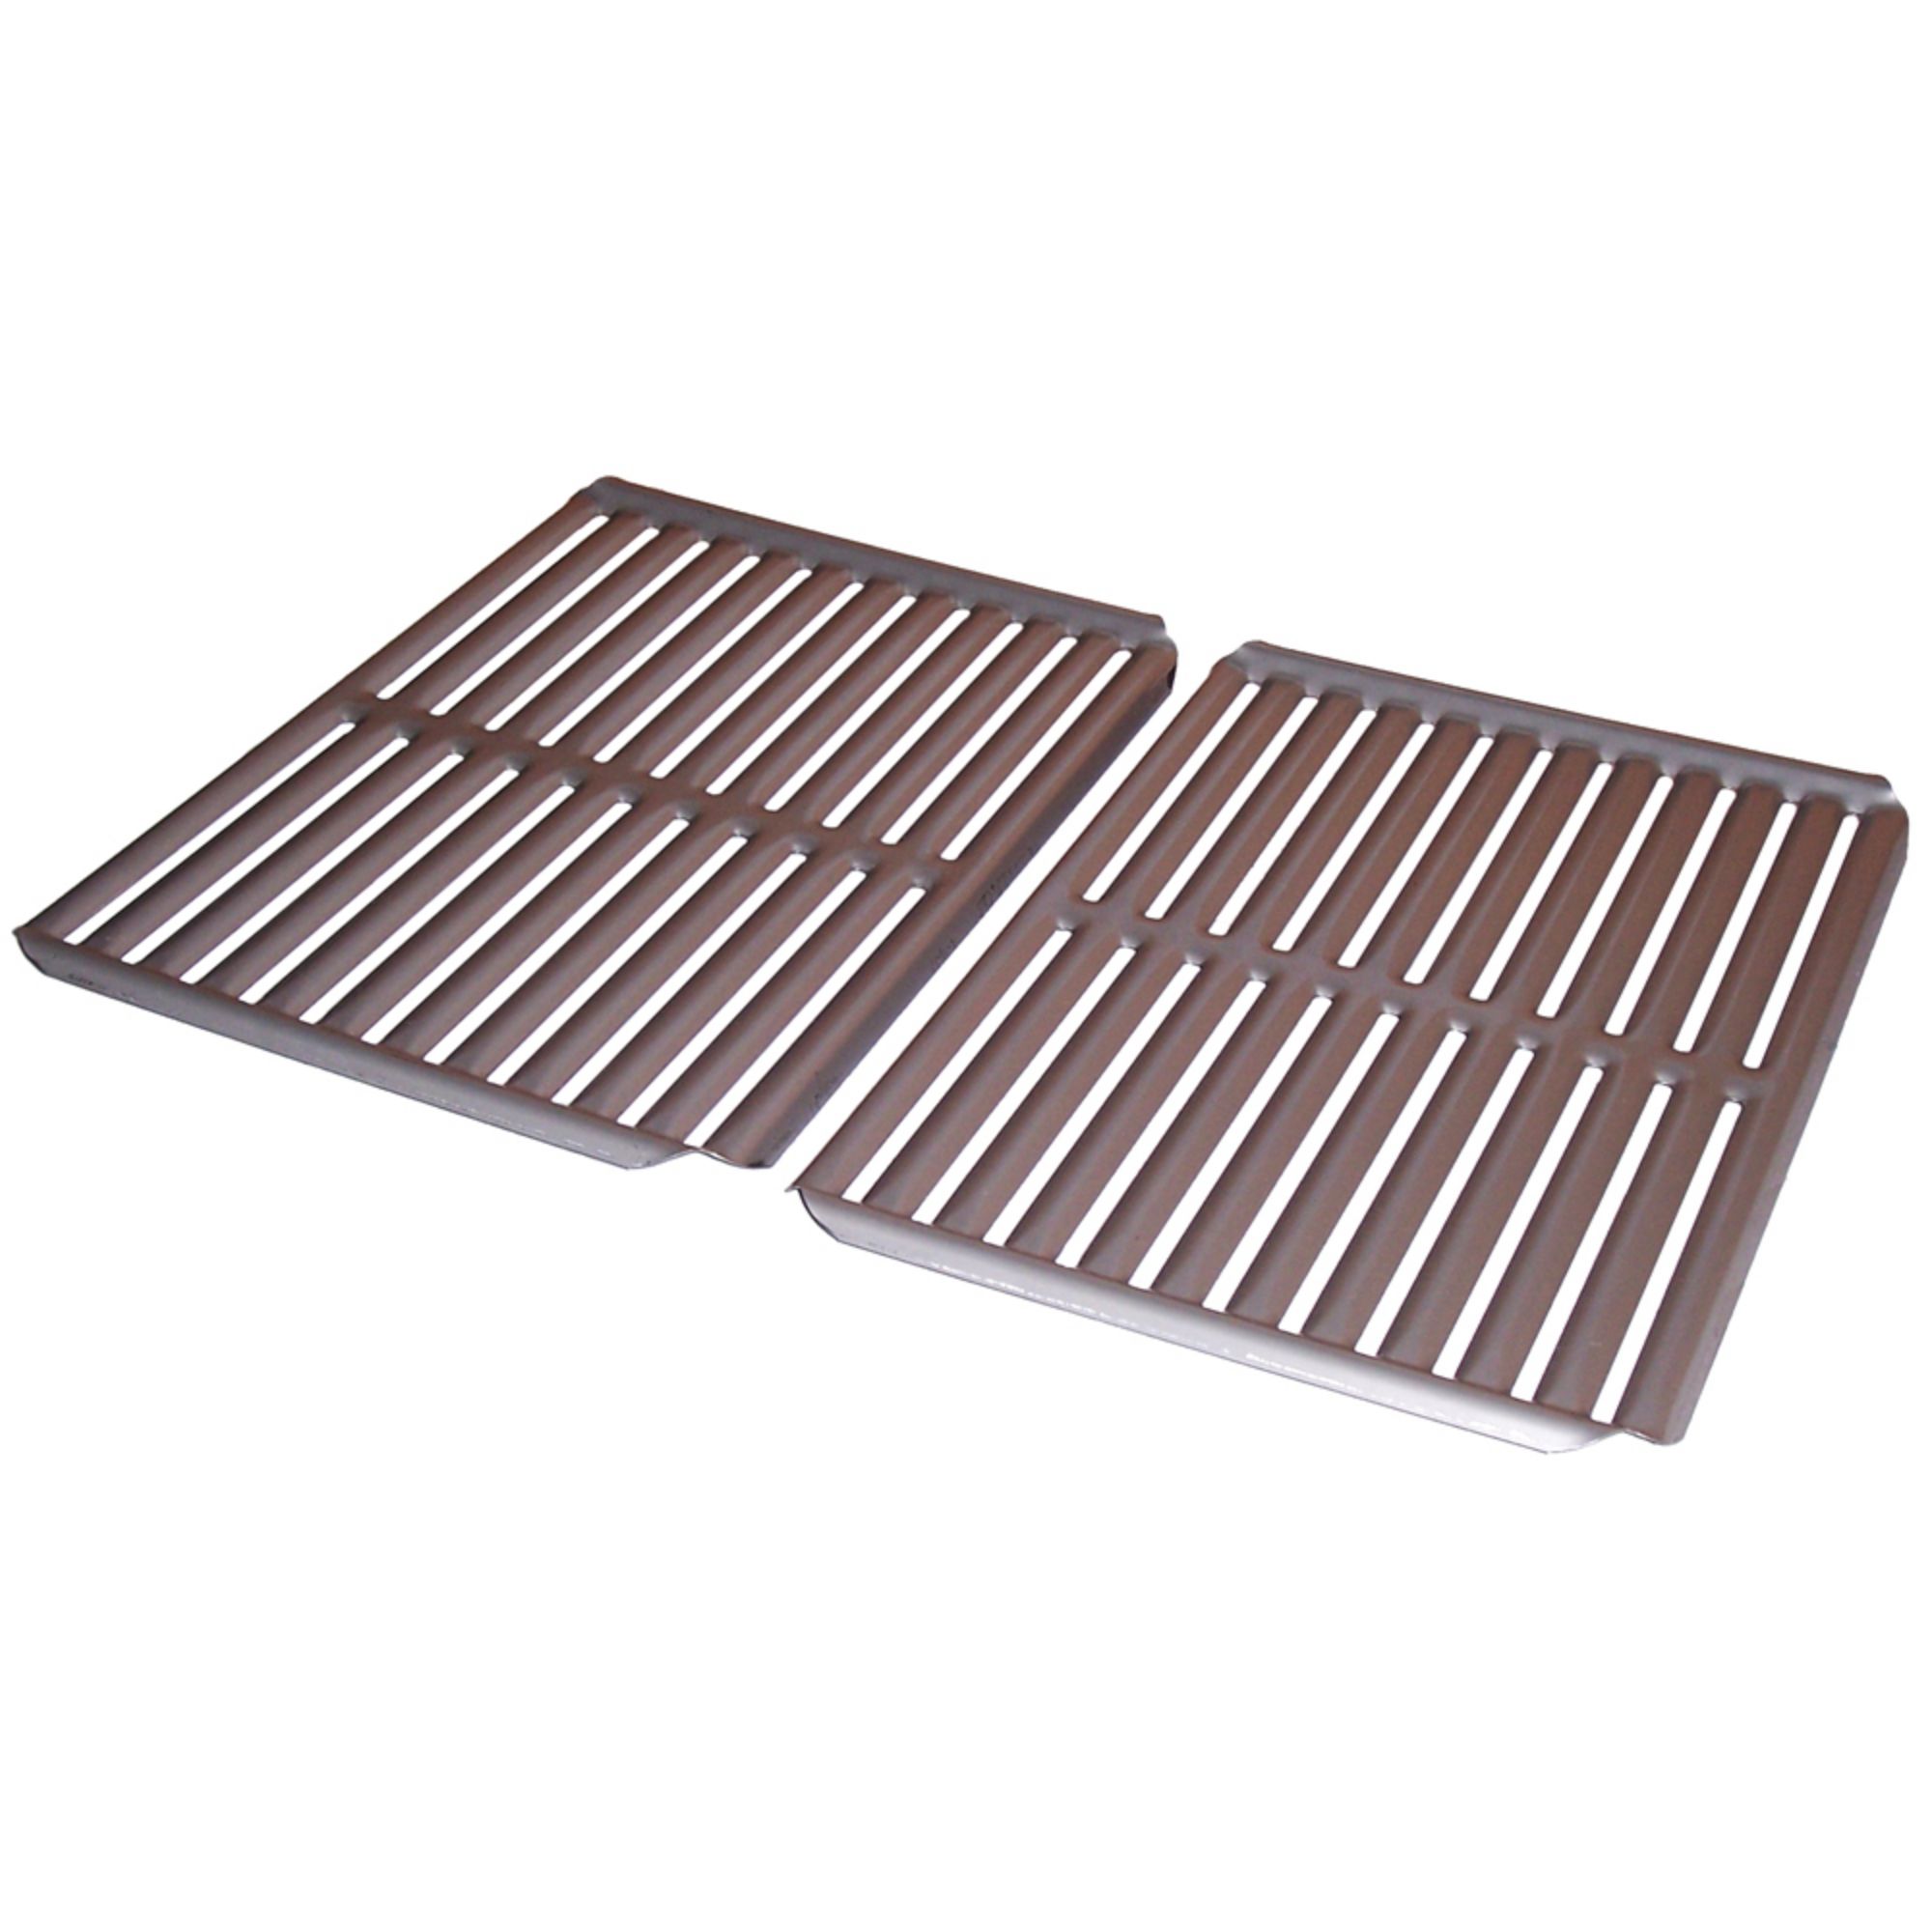 Stamped Stainless Steel Cooking Grid for Ducane Brand Gas Grills